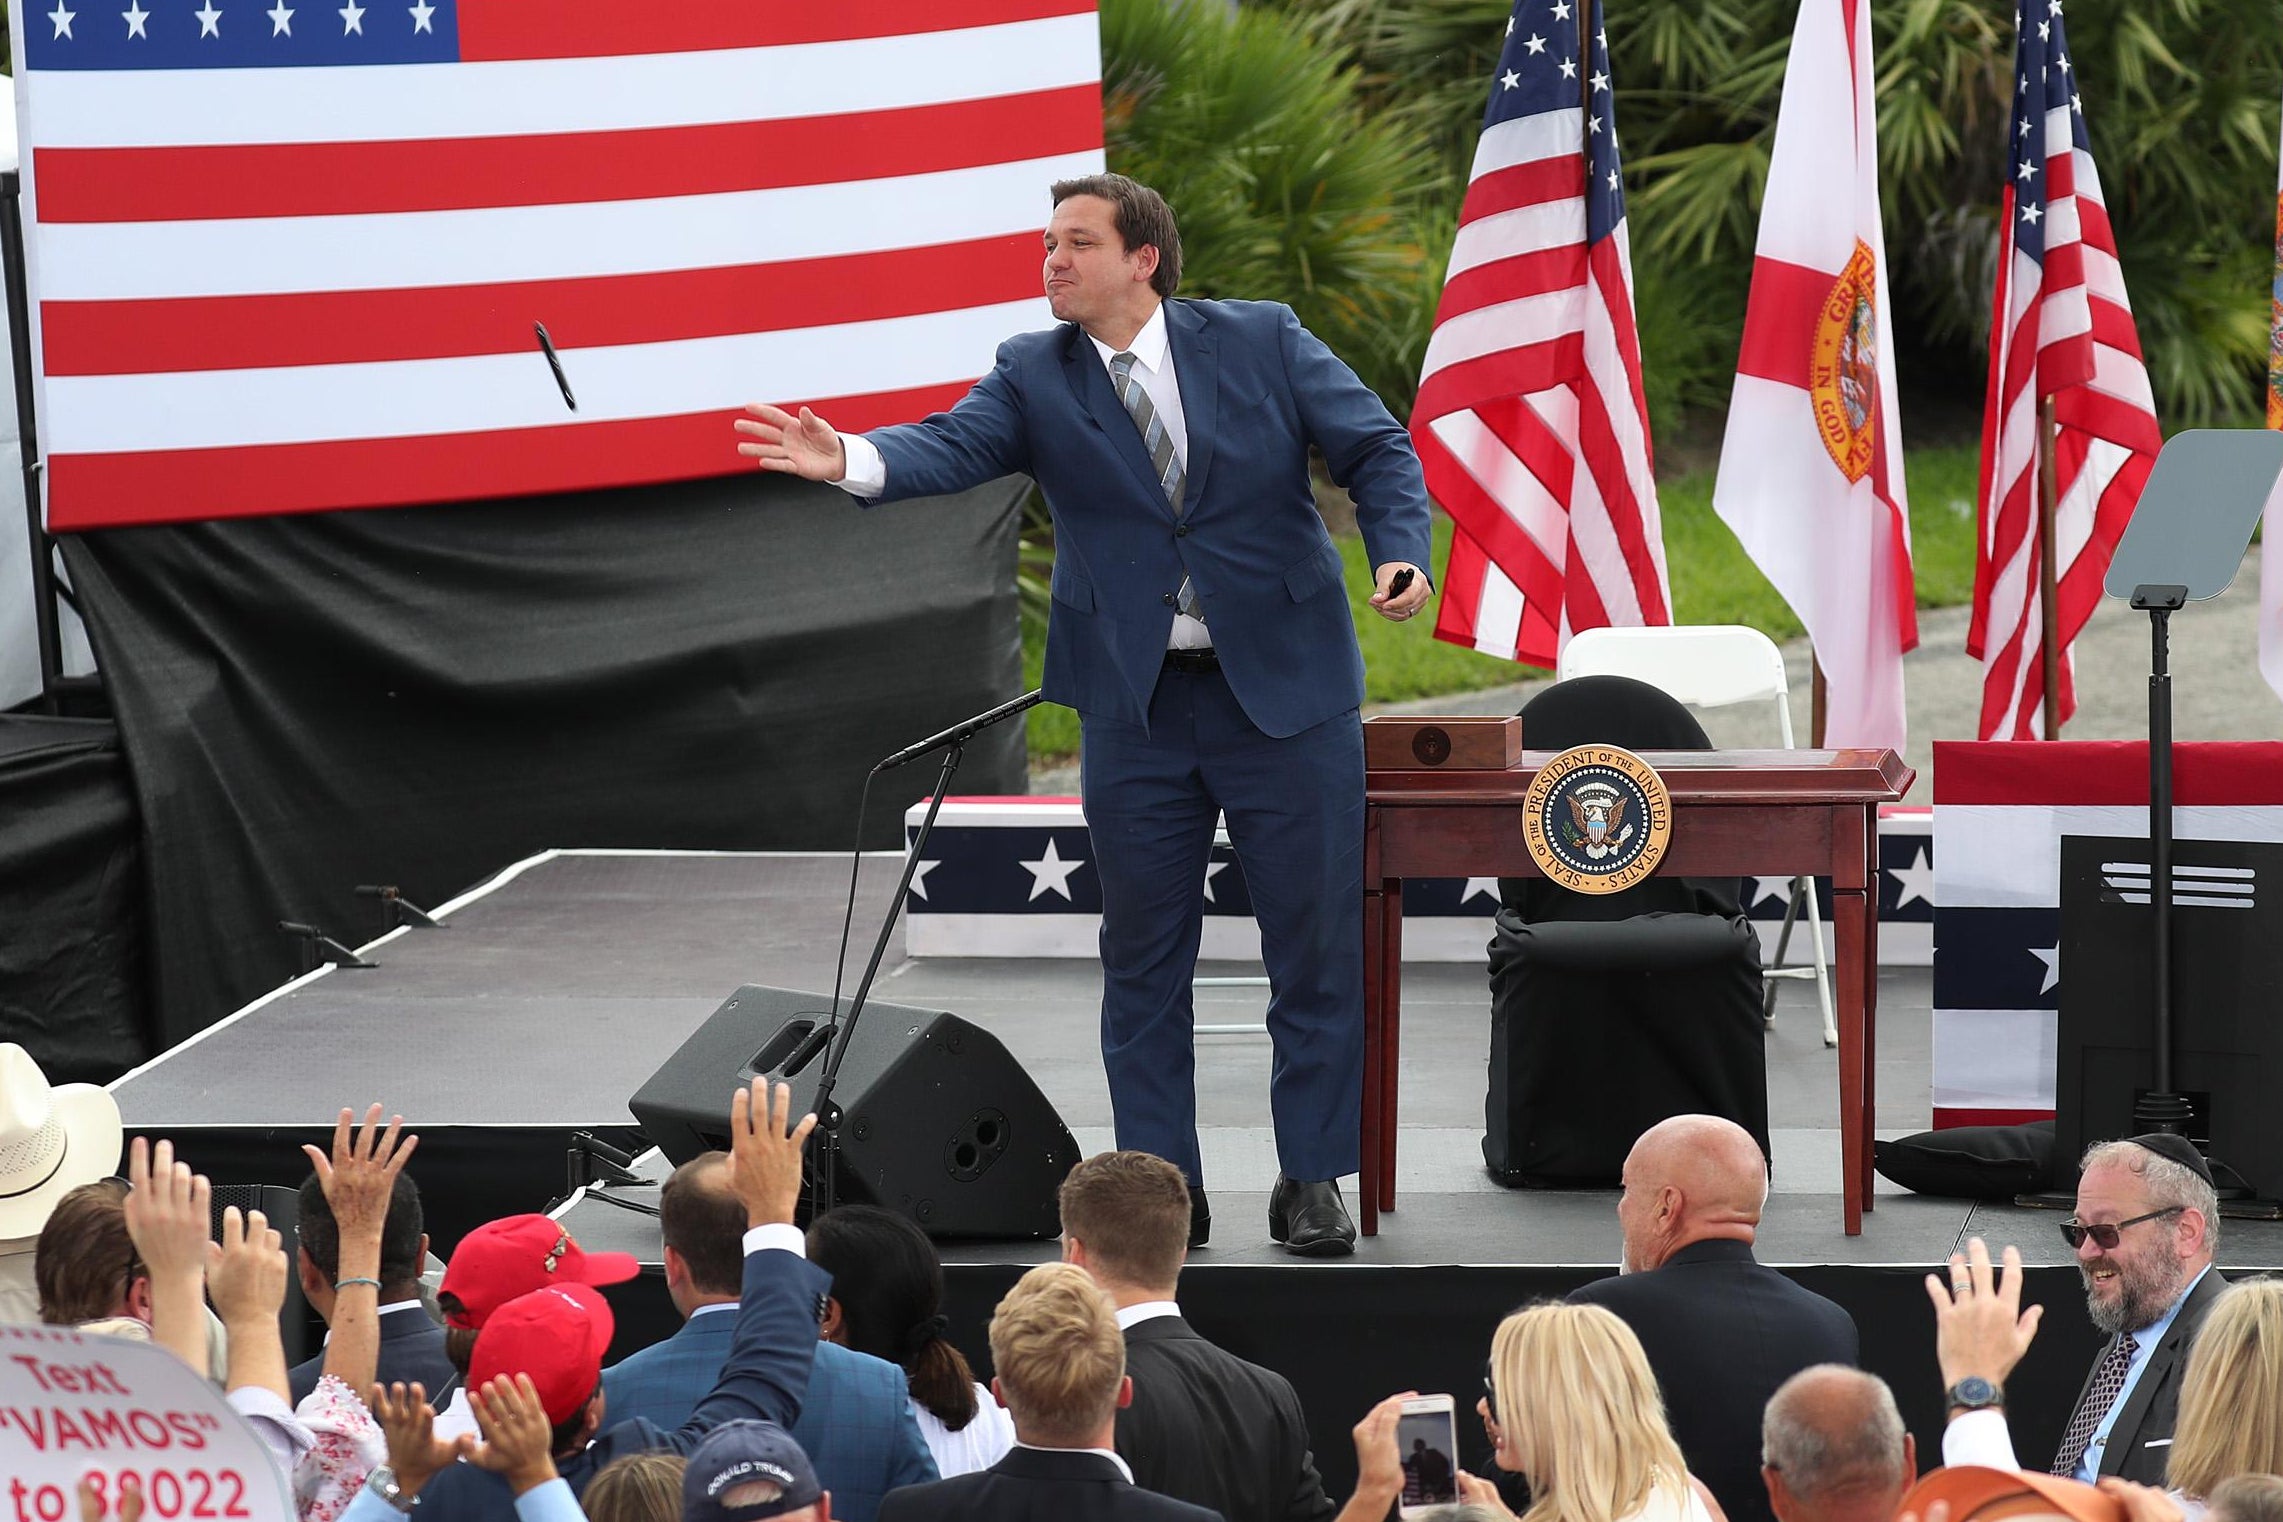 Ron DeSantis stands at the front of a stage with a desk behind him. He throws a black Sharpie into the crowd of people below, their hands outstretched.